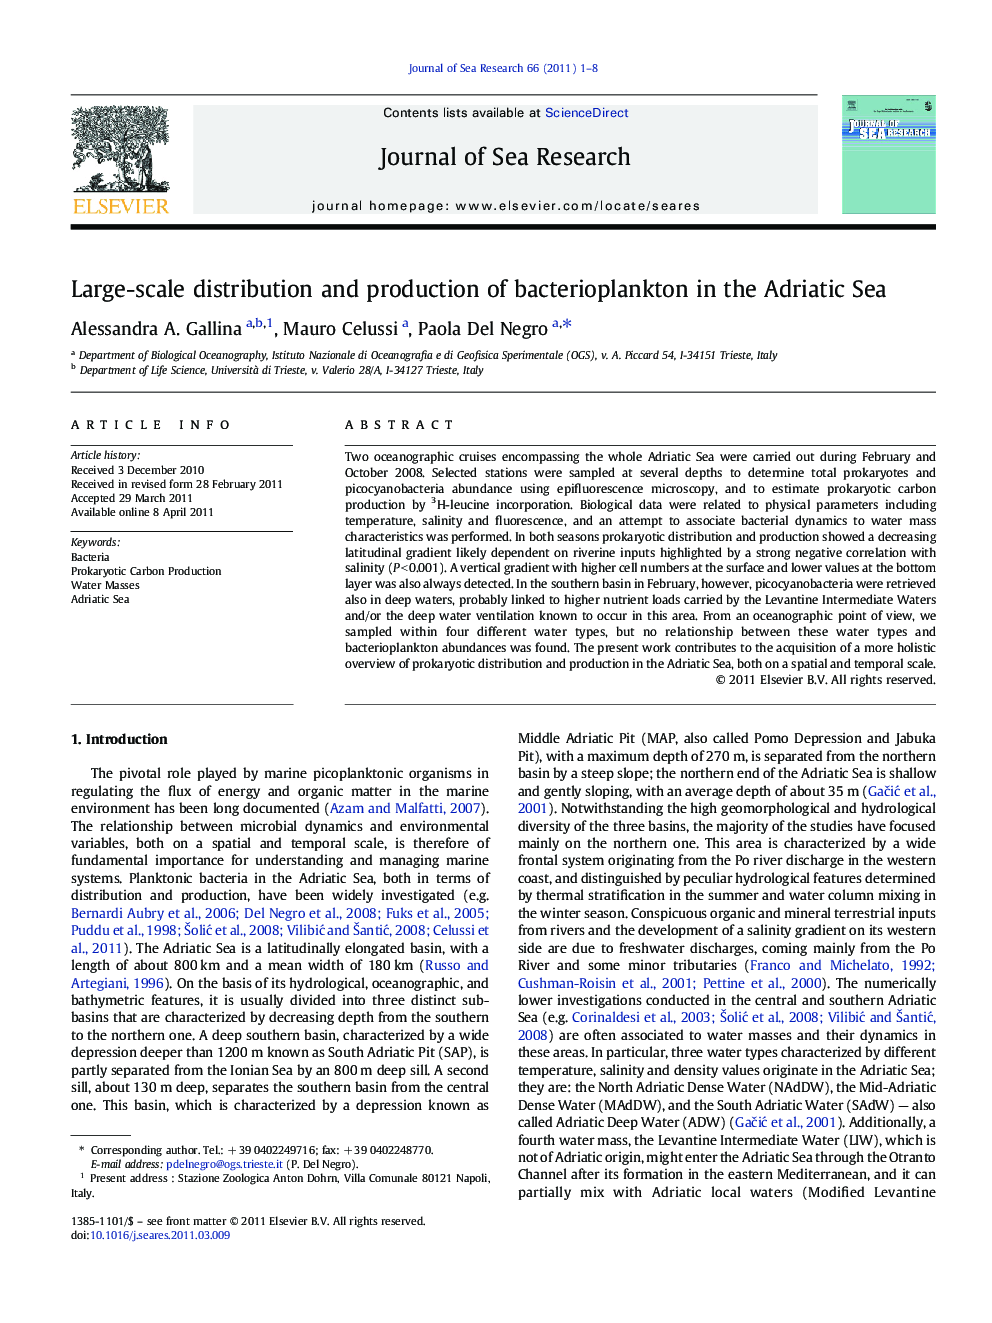 Large-scale distribution and production of bacterioplankton in the Adriatic Sea